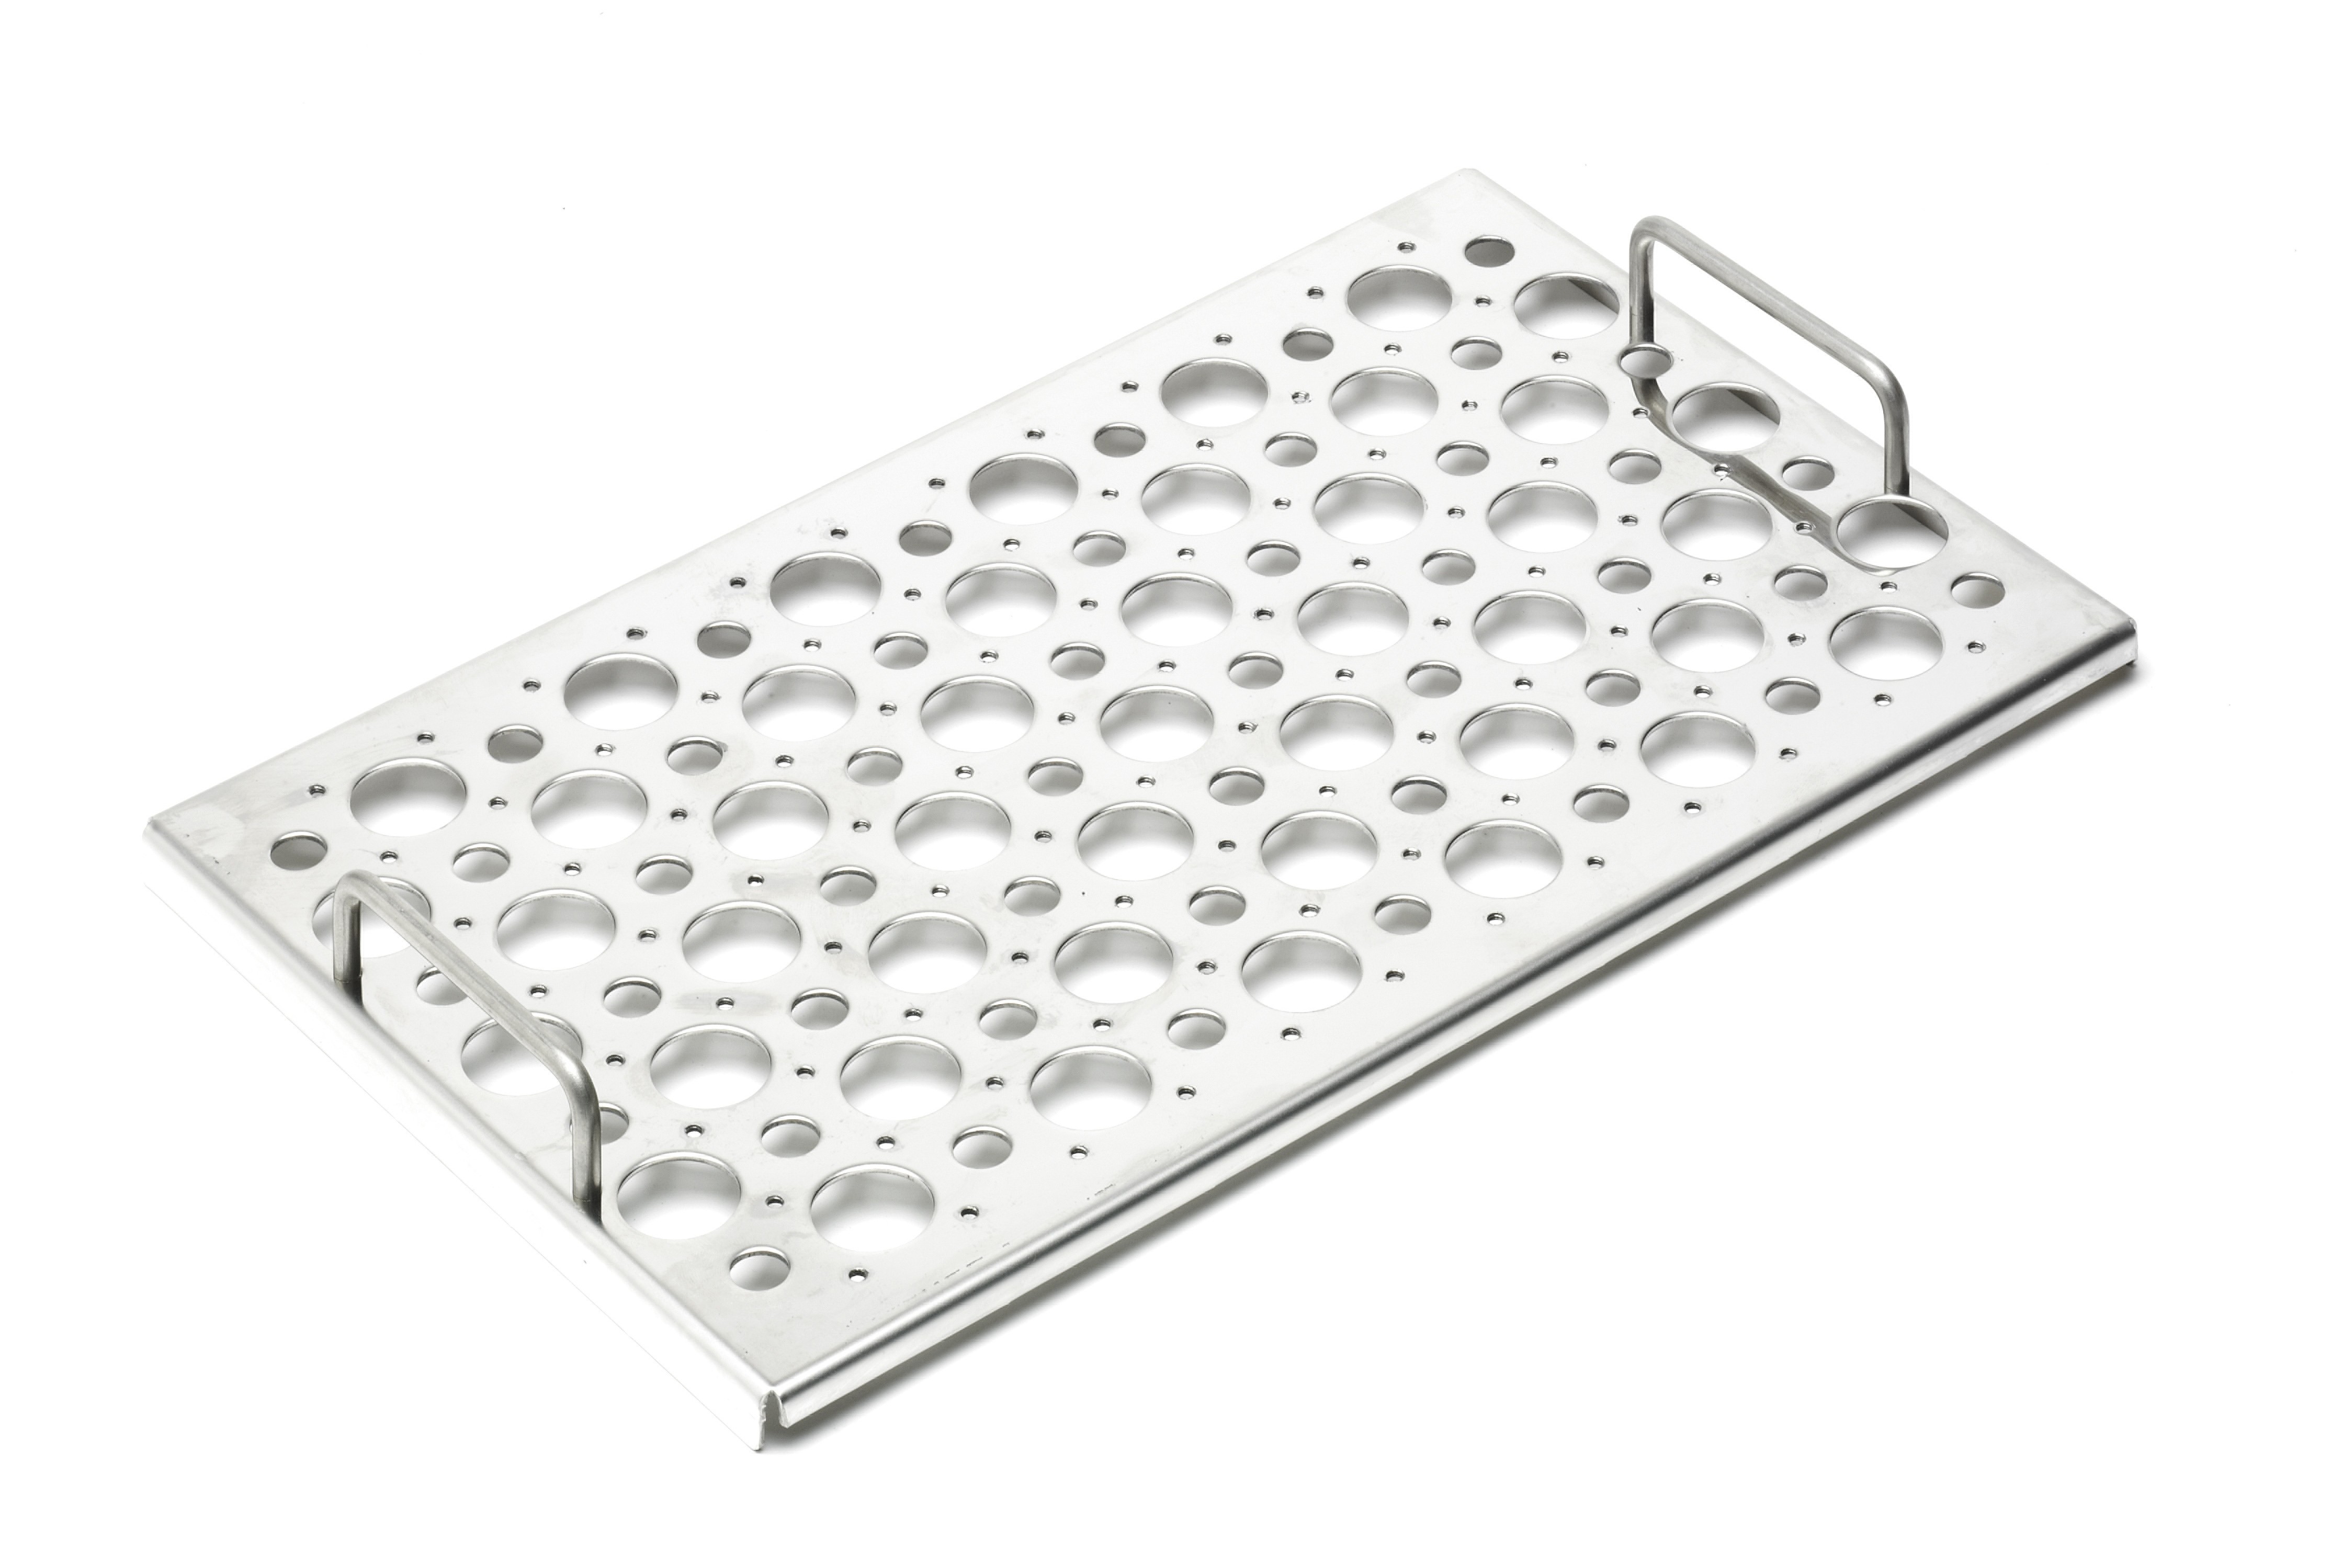 TF26 - Grant Instruments Stainless Steel Flask/Plate Tray For Shaking Water Baths